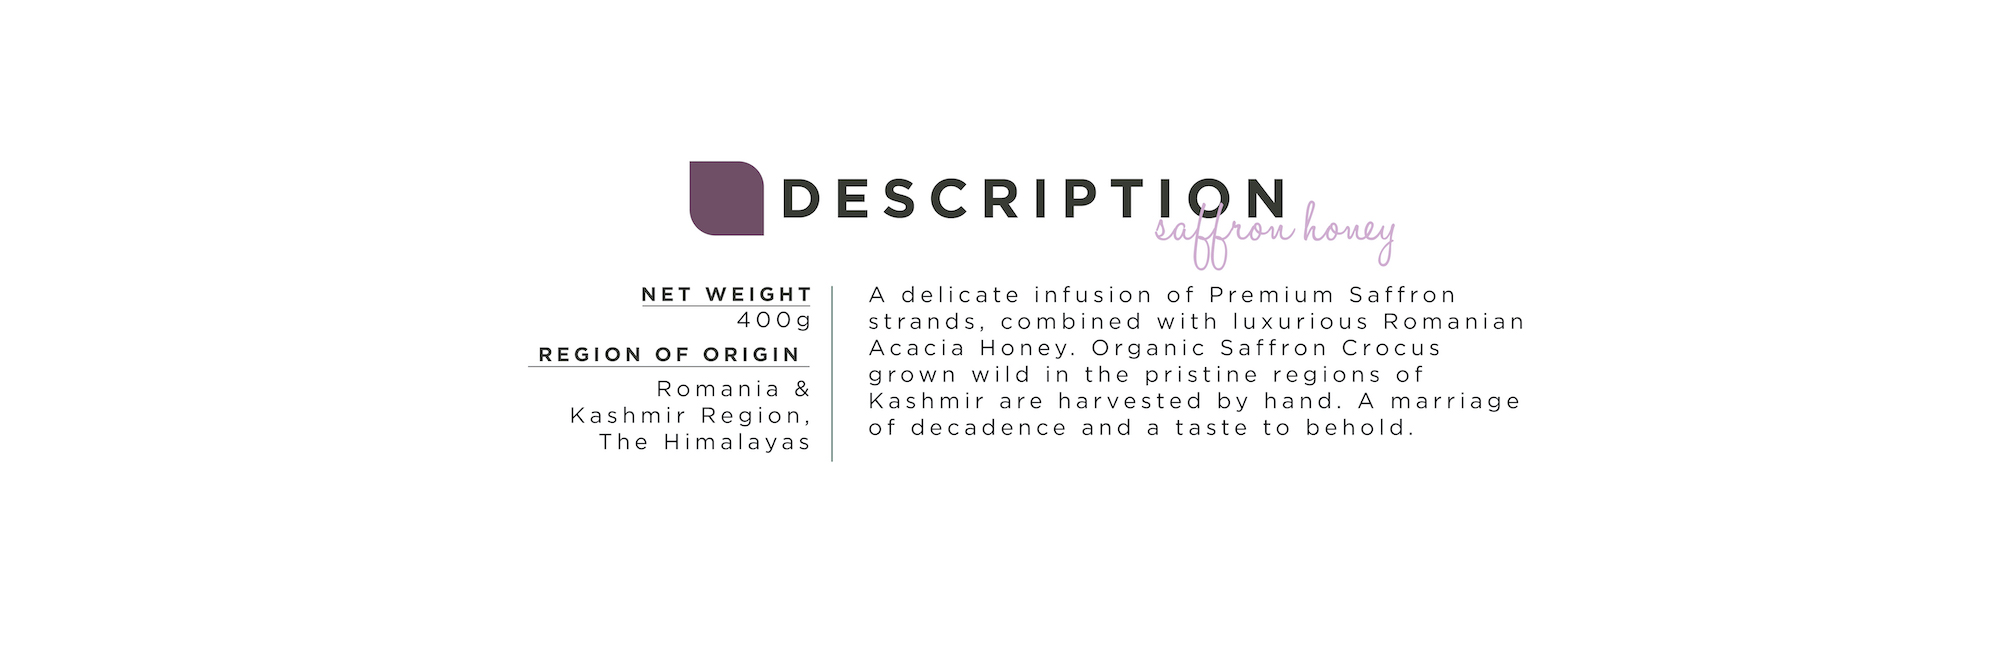 Organic Saffron Honey. Net Weight: 400g; Region of Origin: Romania & Kashmir Region, The Himalayas; A delicate infusion of Premium Saffron strands, combined with luxurious Romanian Acacia Honey. Organic Saffron Crocus grown wild in the pristine regions of Kashmir are harvested by hand. A marriage of decadence and a taste to behold.